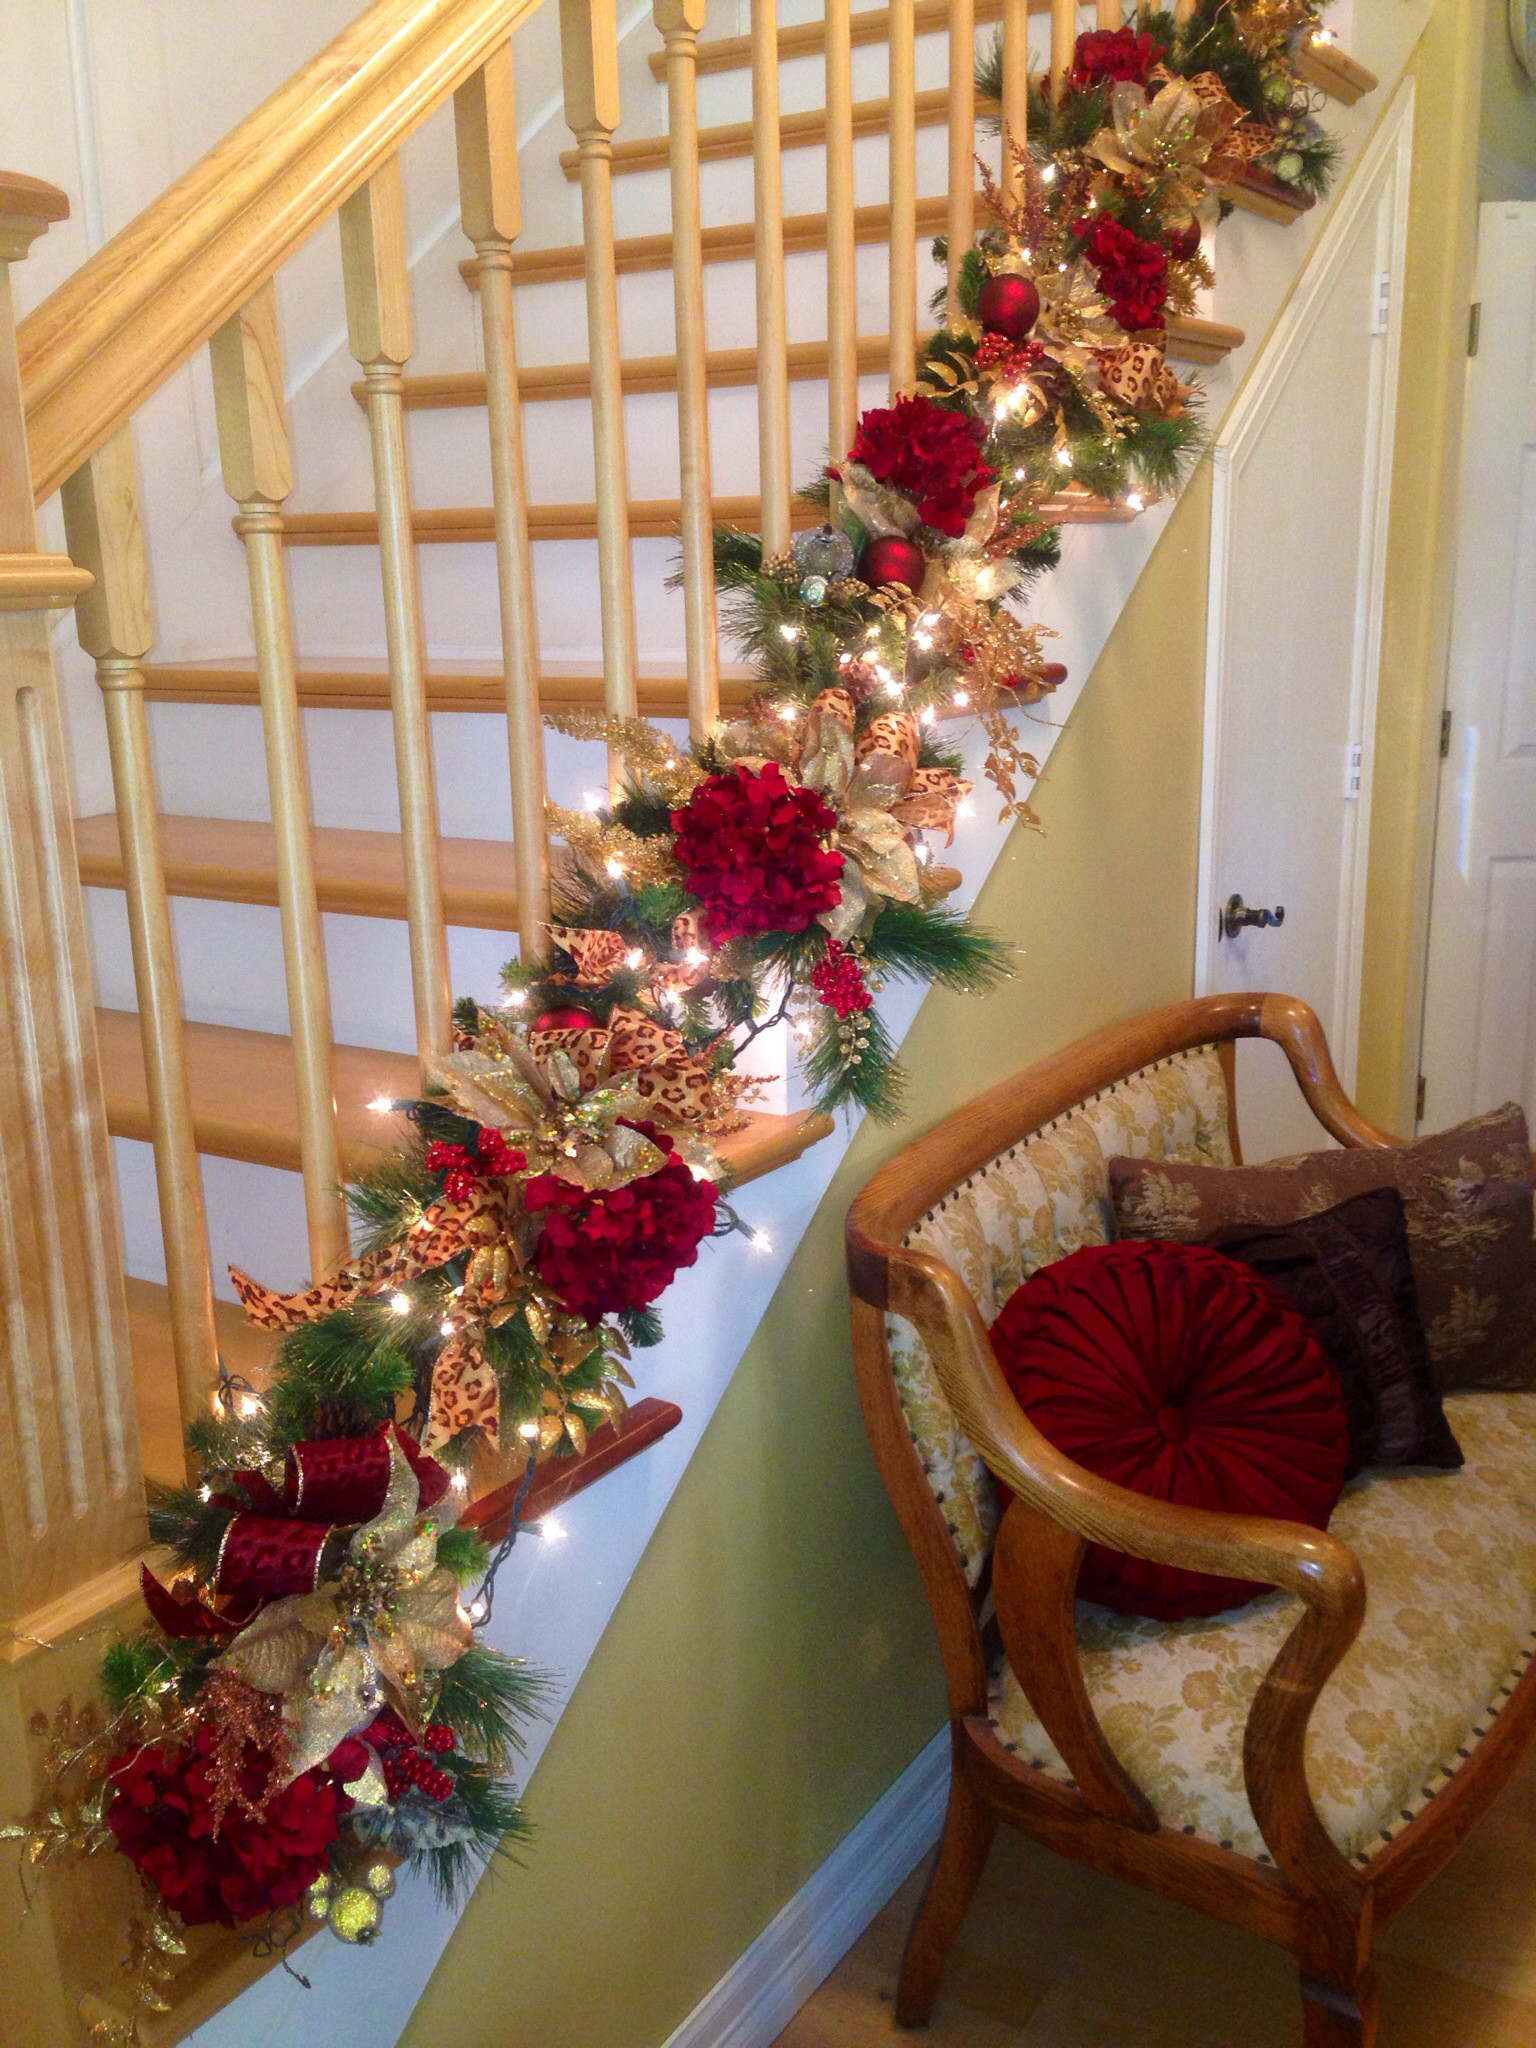 Christmas Staircase Decorating
 Decorate The Staircase For Christmas – 45 Beautiful Ideas